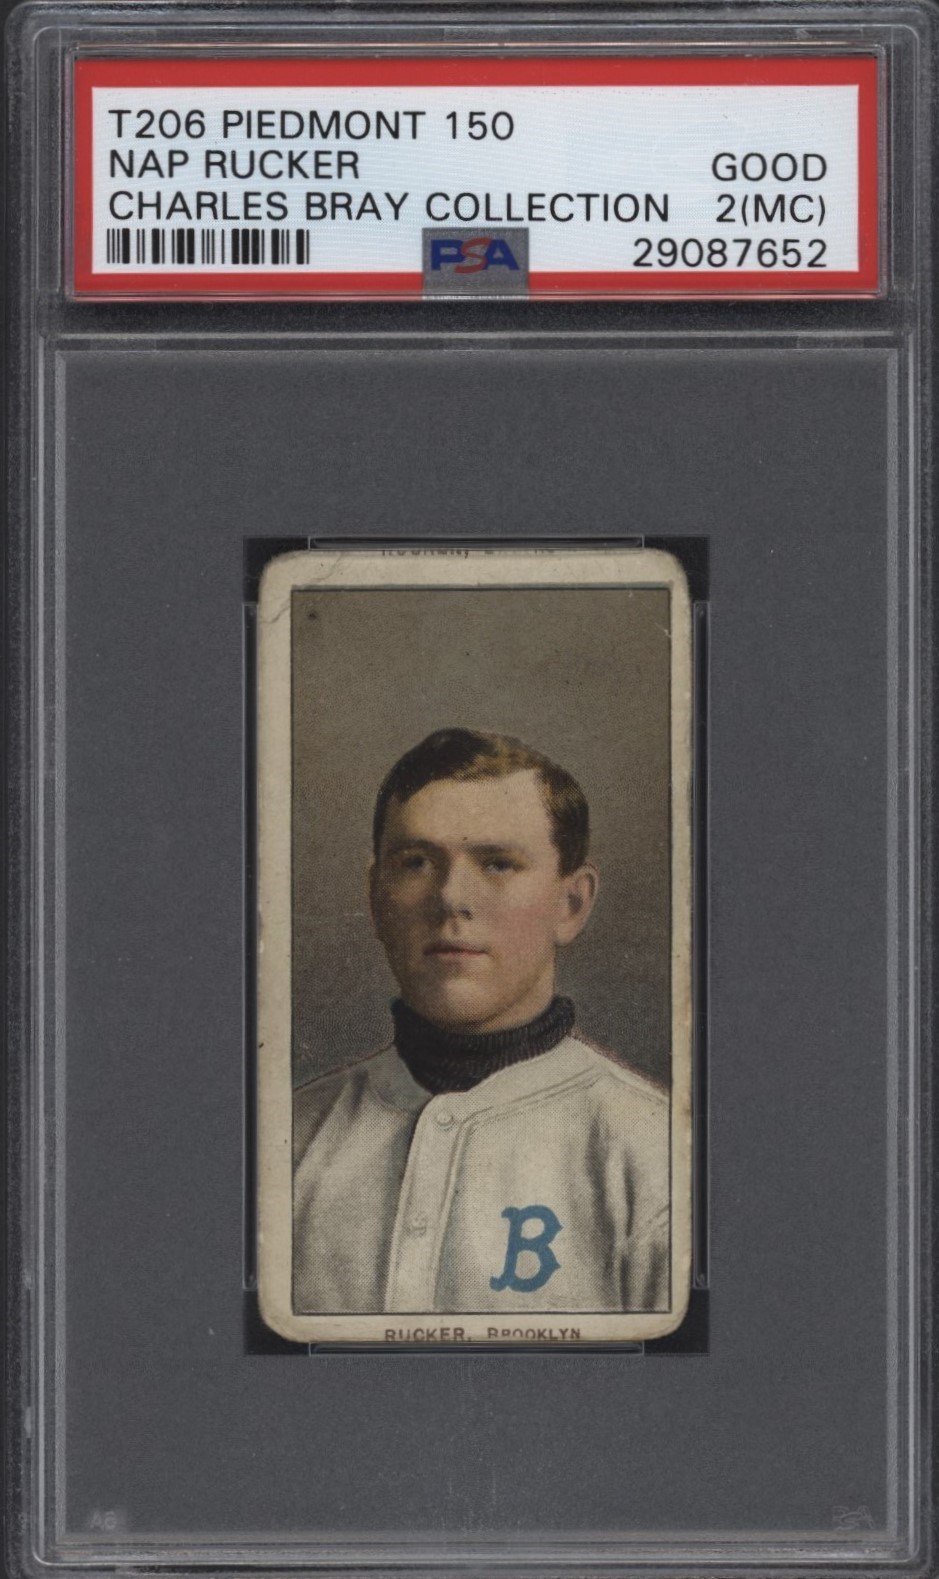 Baseball and Trading Cards - T206 Piedmont 150 Nap Rucker PSA 2 From the Charles Bray Collection